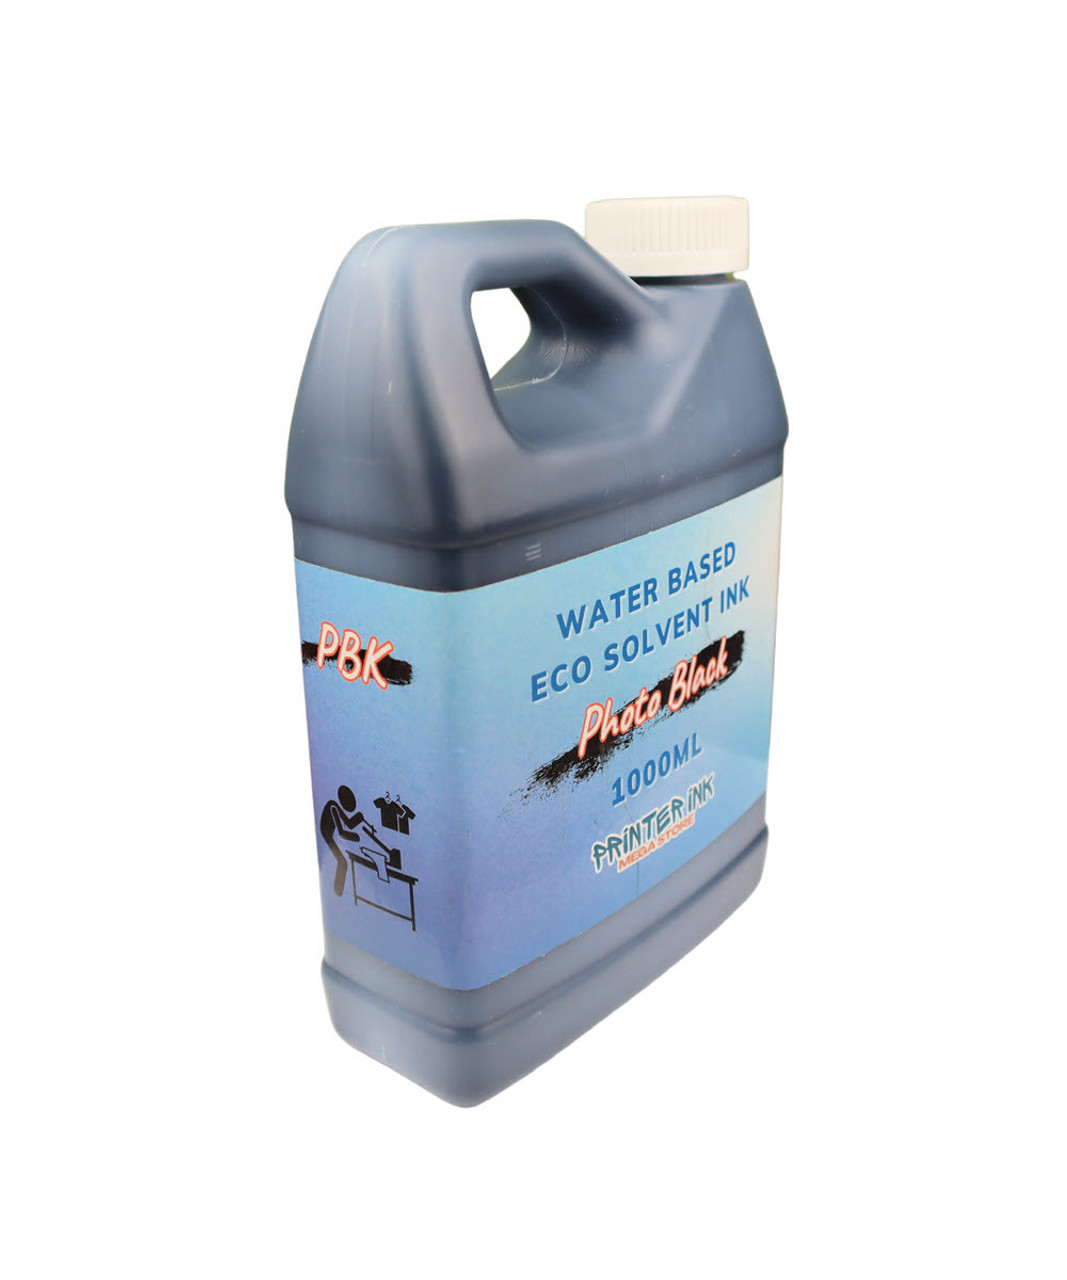 Photo Black Water Based Eco Solvent Ink 1000ml Bottle for Epson SureColor T3270 T5270 T7270 Printers